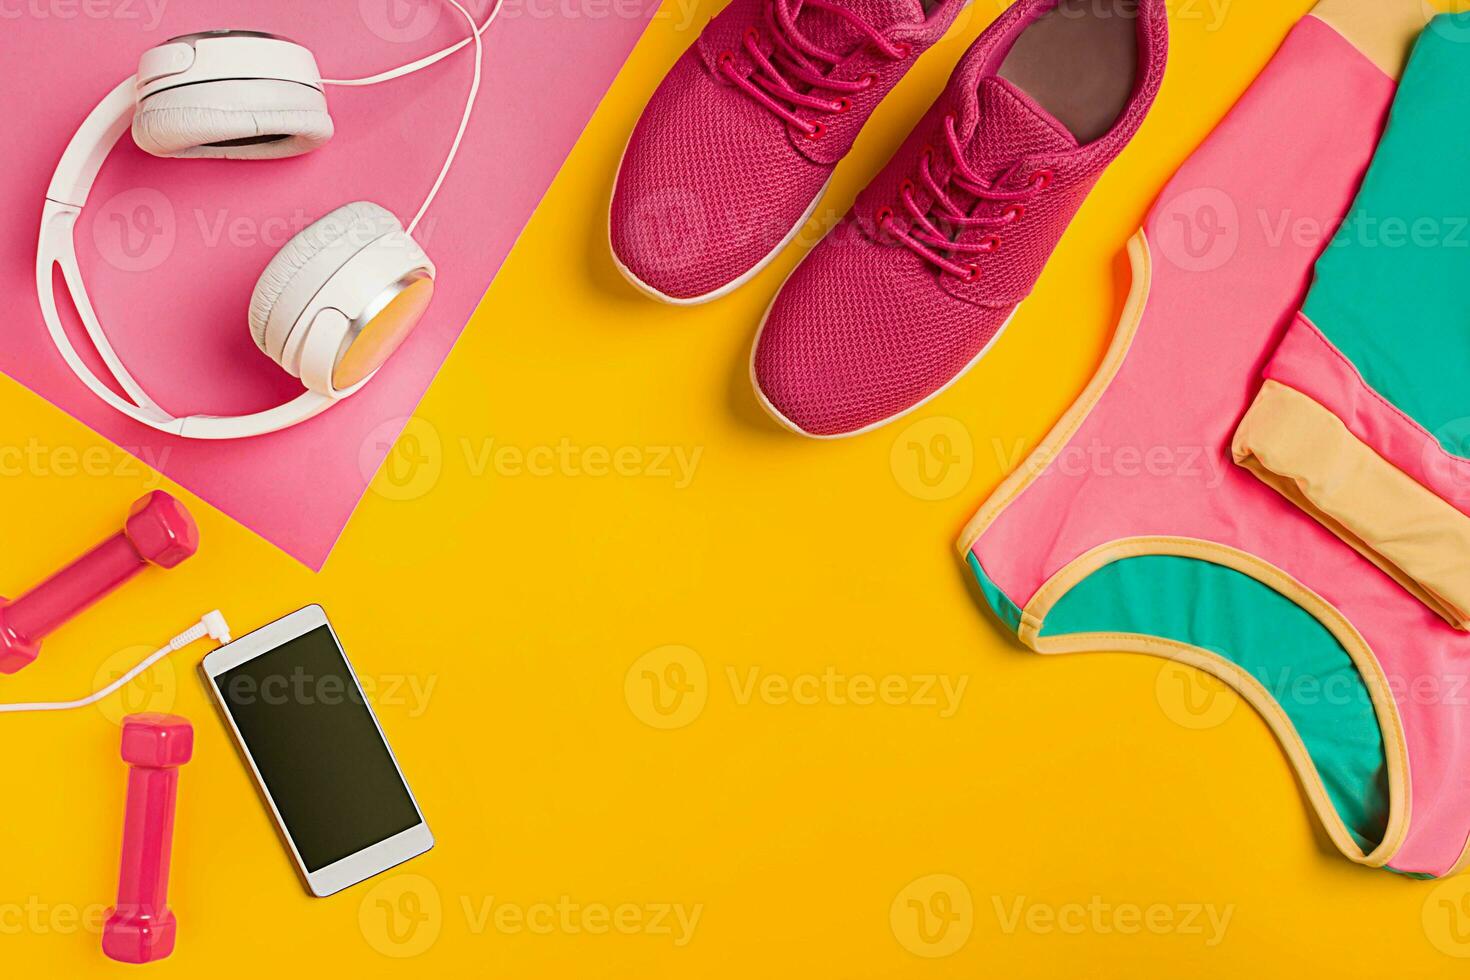 Athlete's set with female clothing, dumbbells and bottle of water on yellow background photo